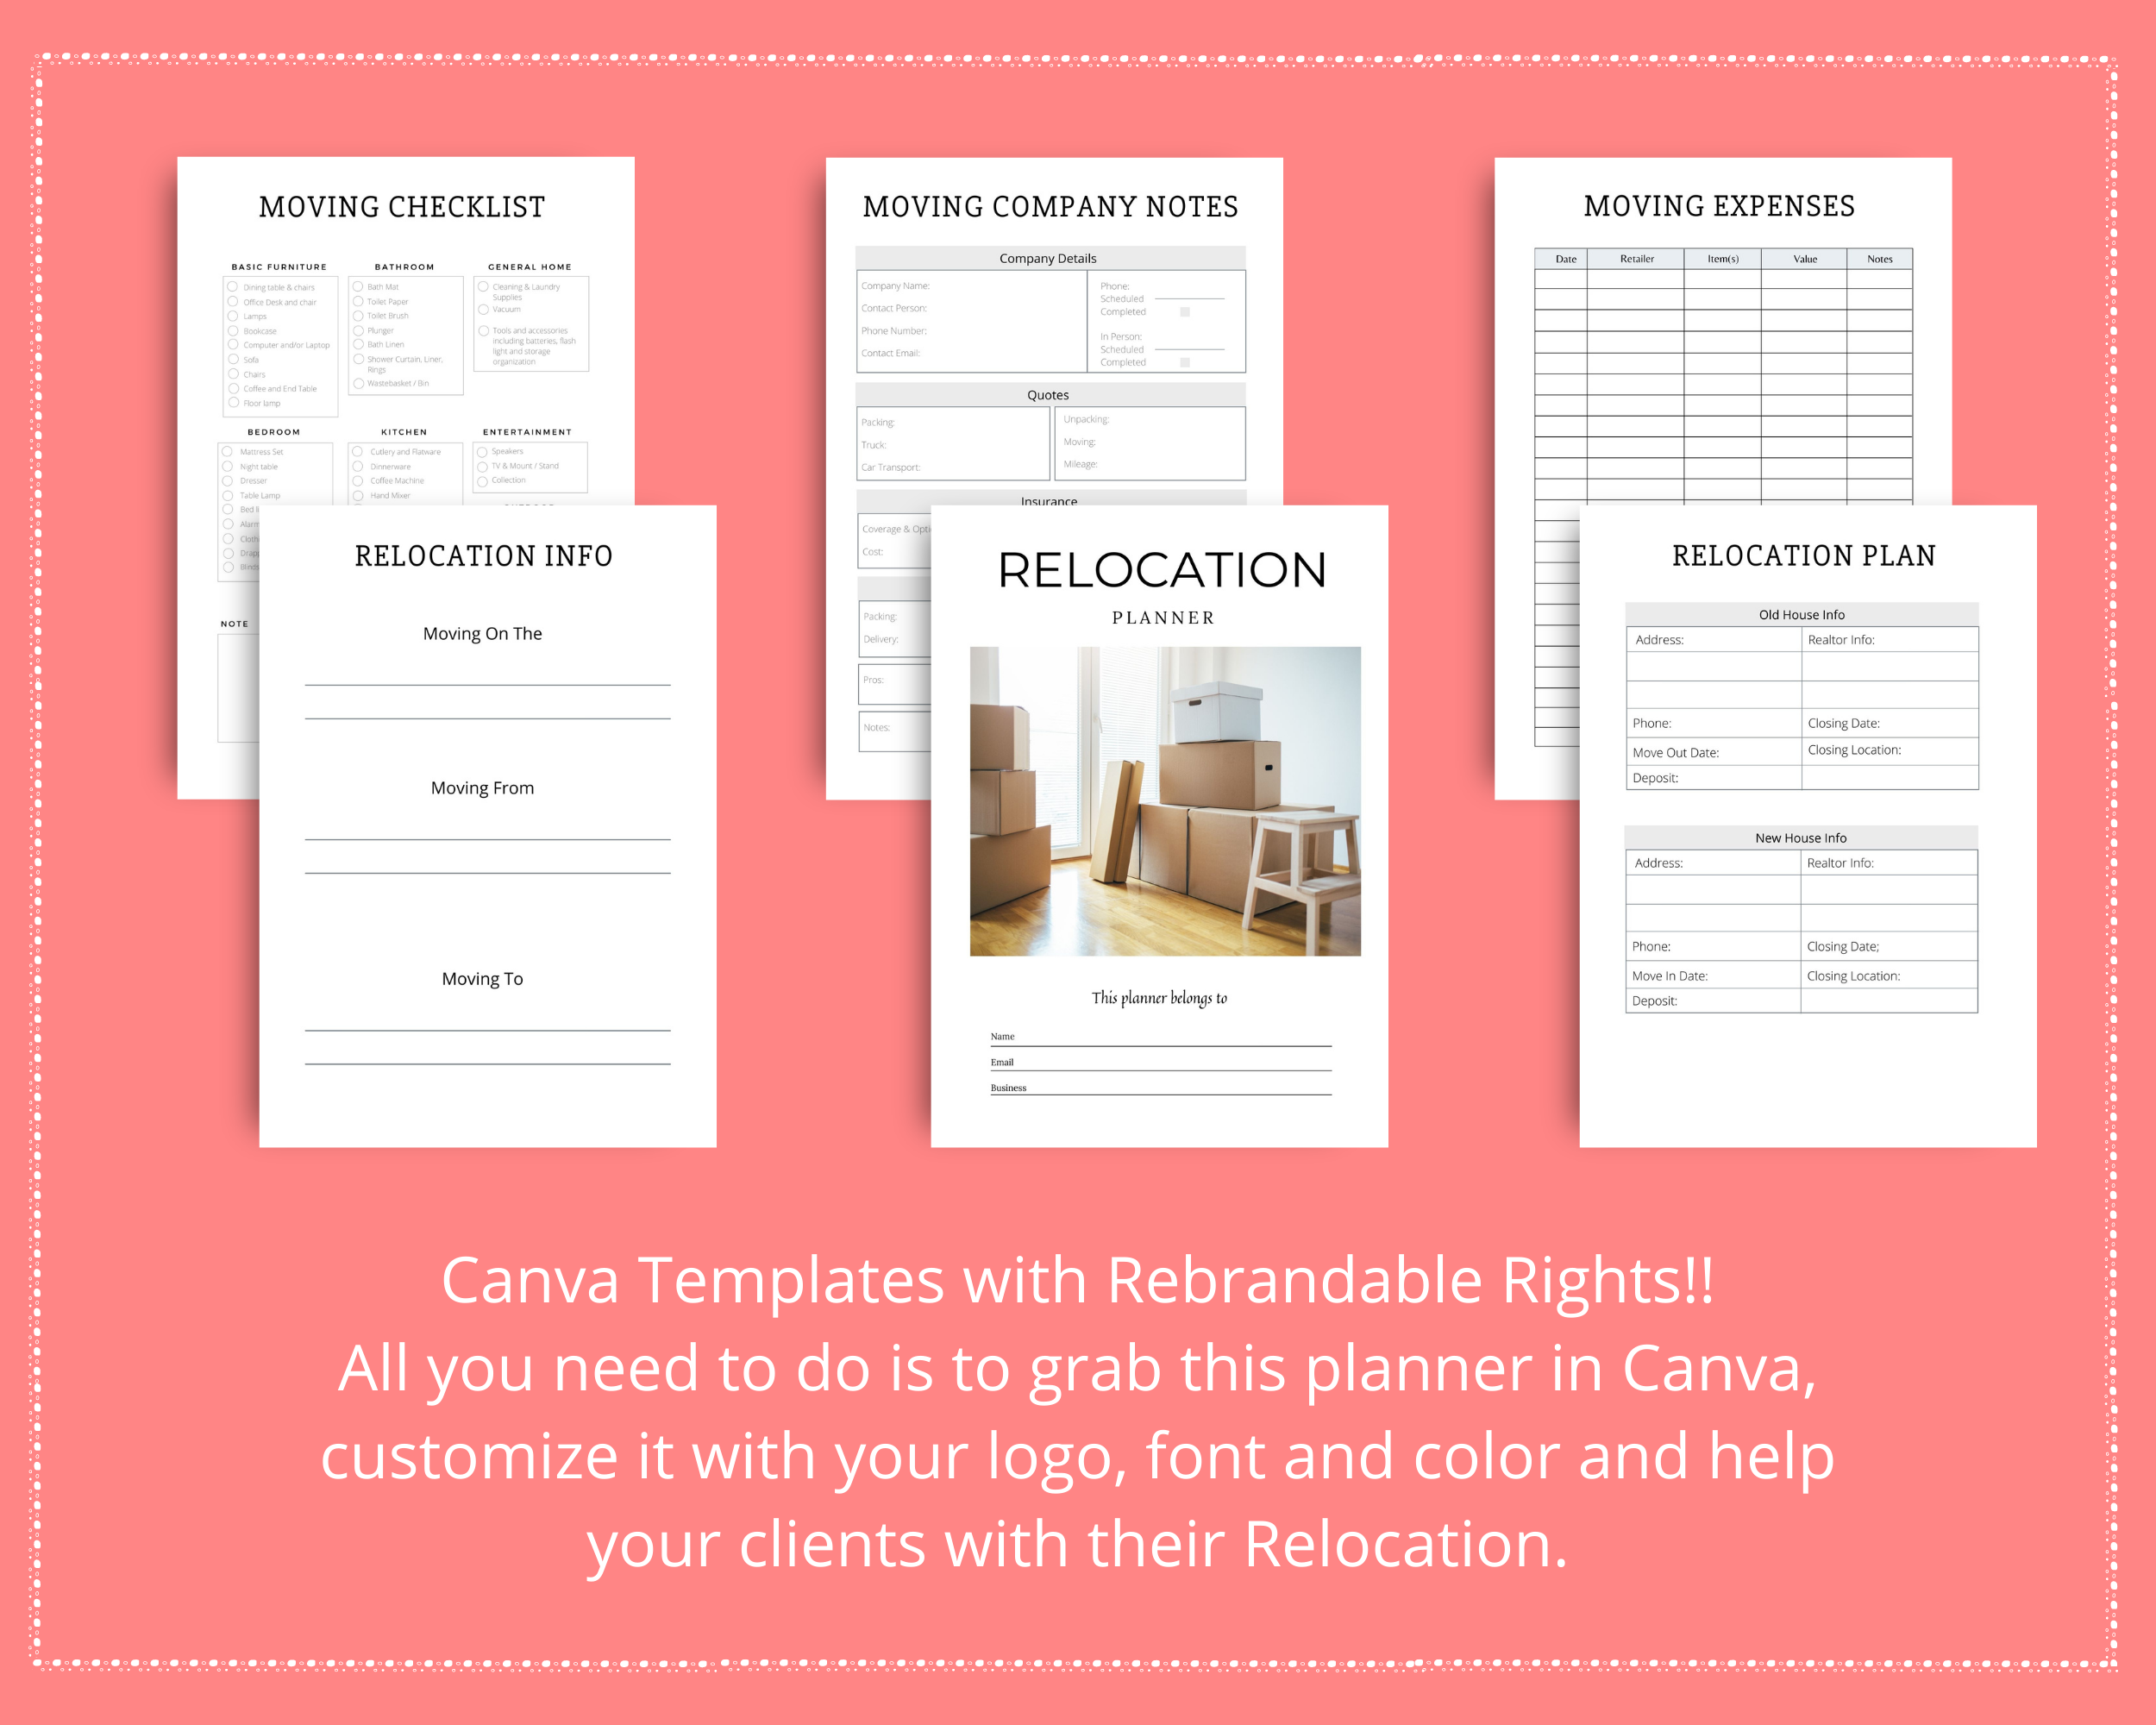 Editable Relocation Planner in Canva | Commercial Use